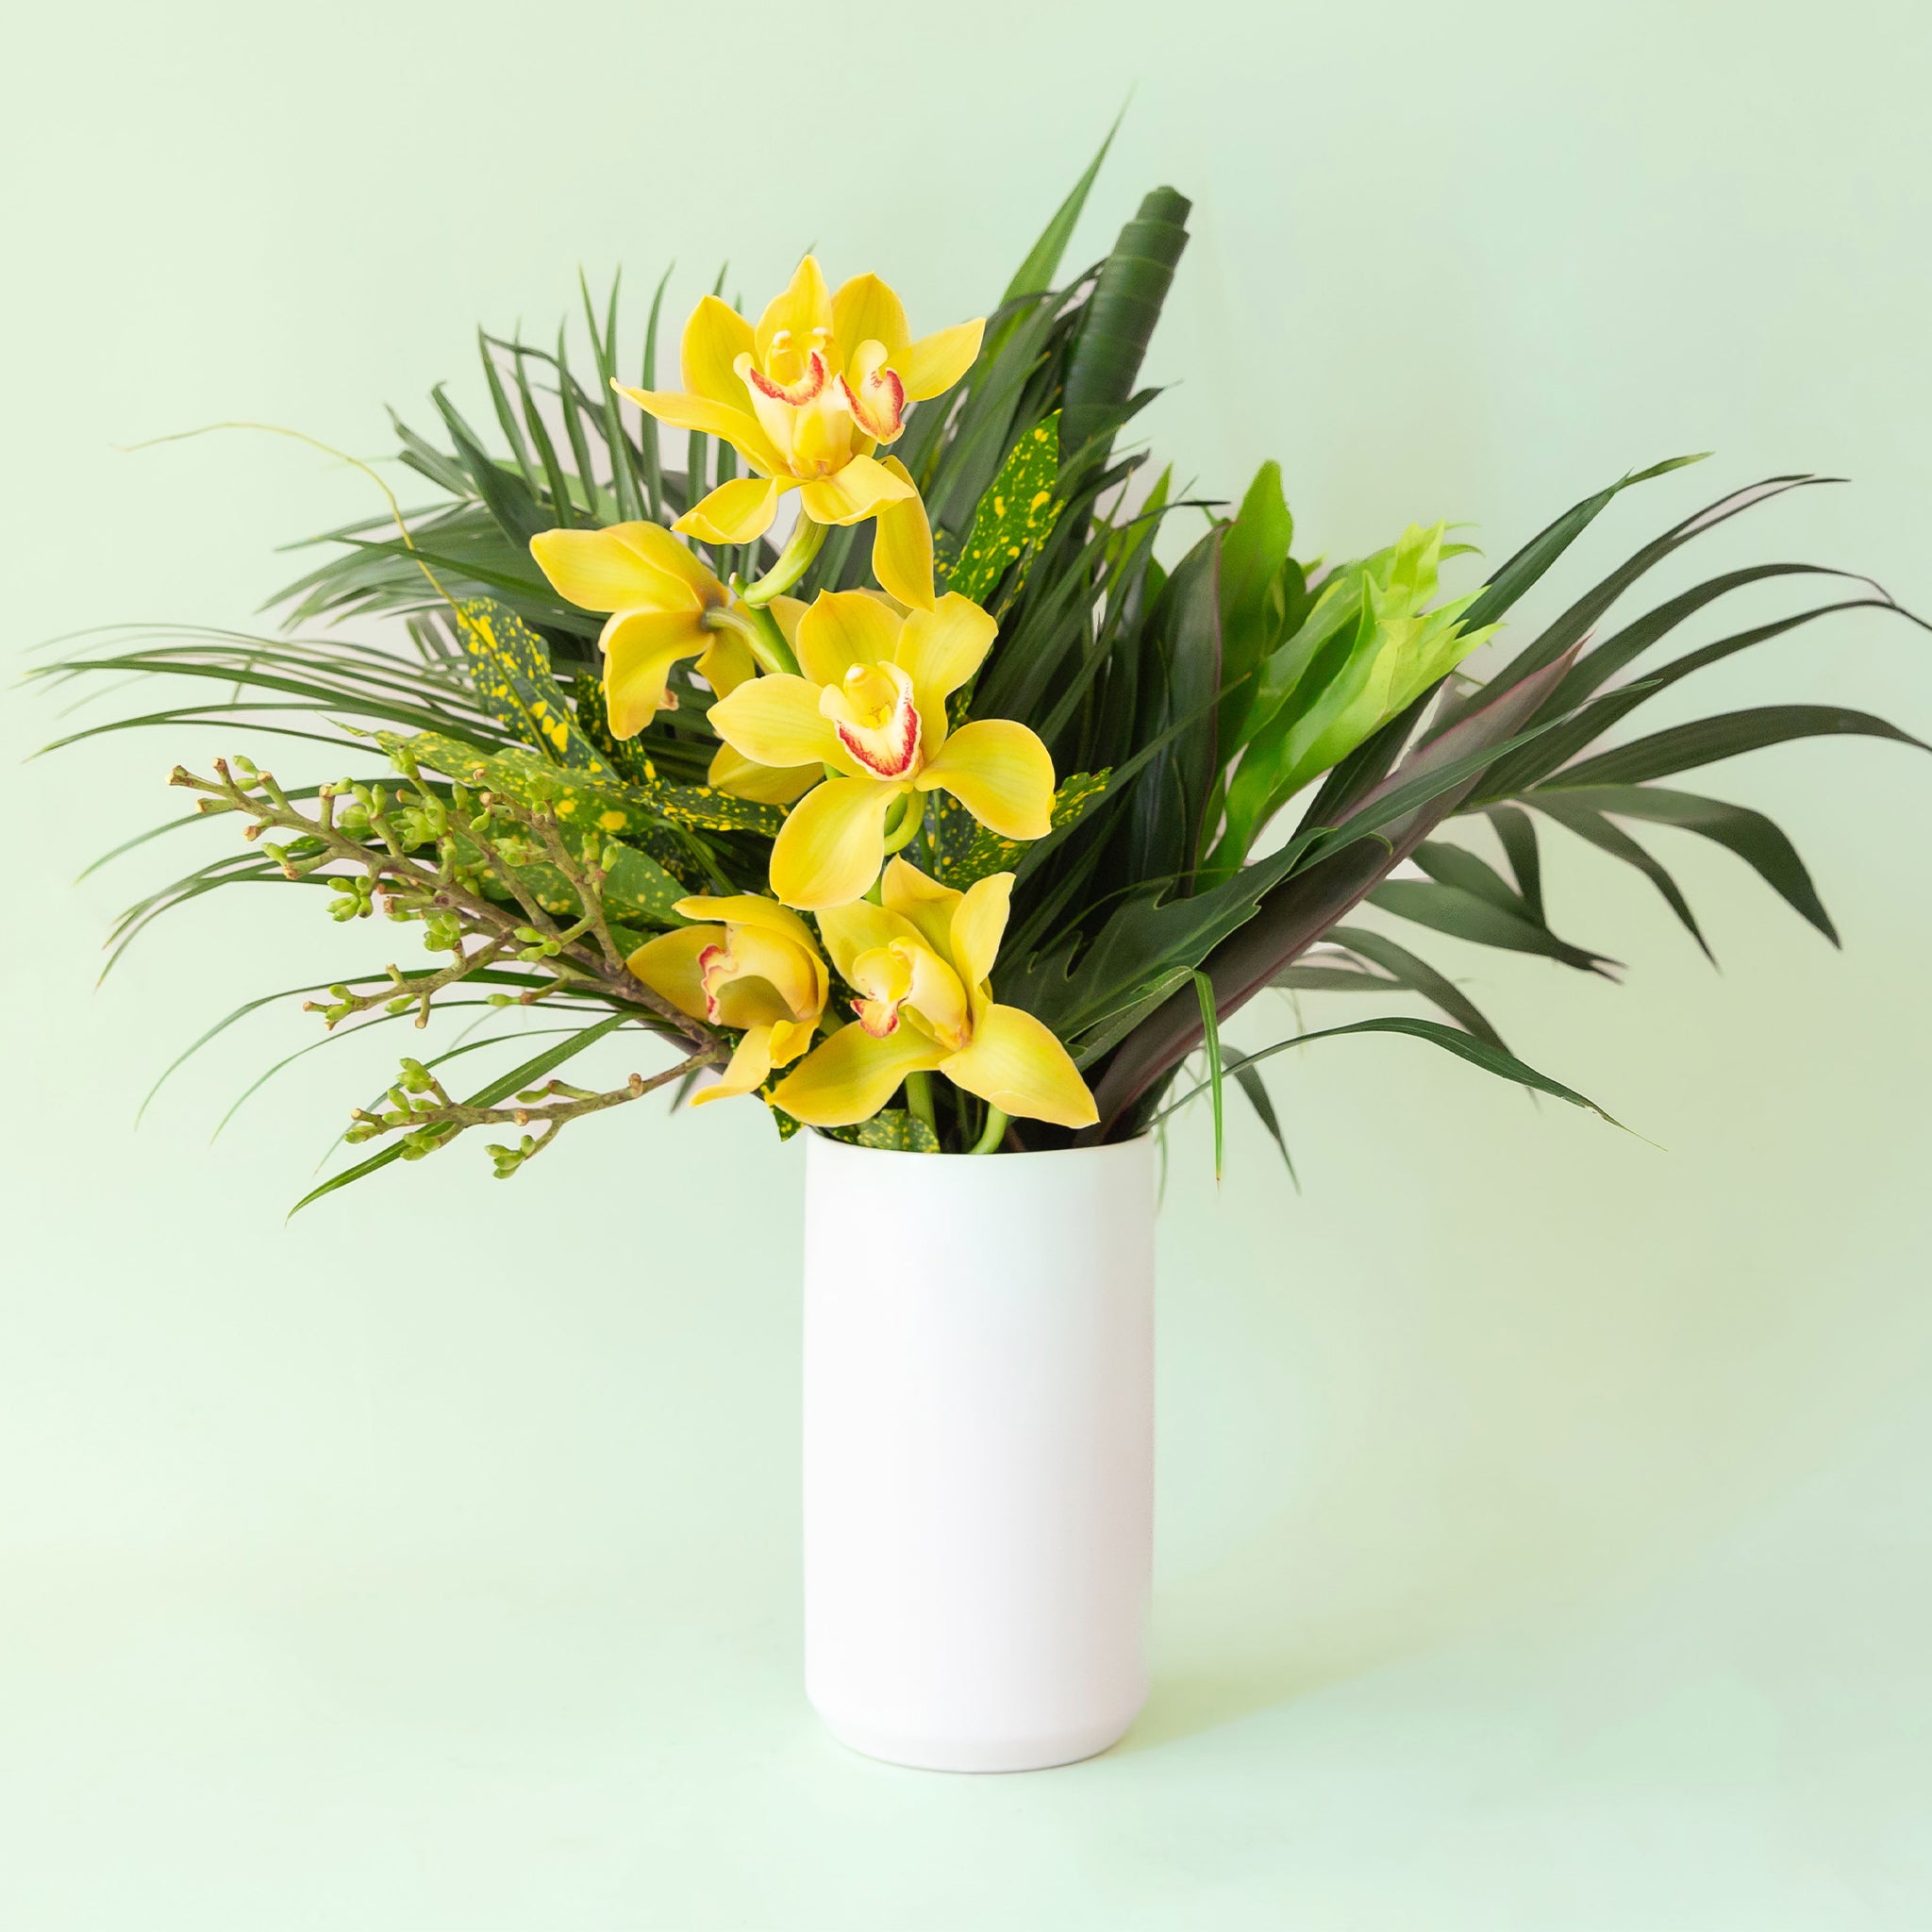 Narrow white cylinder vase filled with palms and tropical flowers not included with purchase. The vase lays against a light green background.